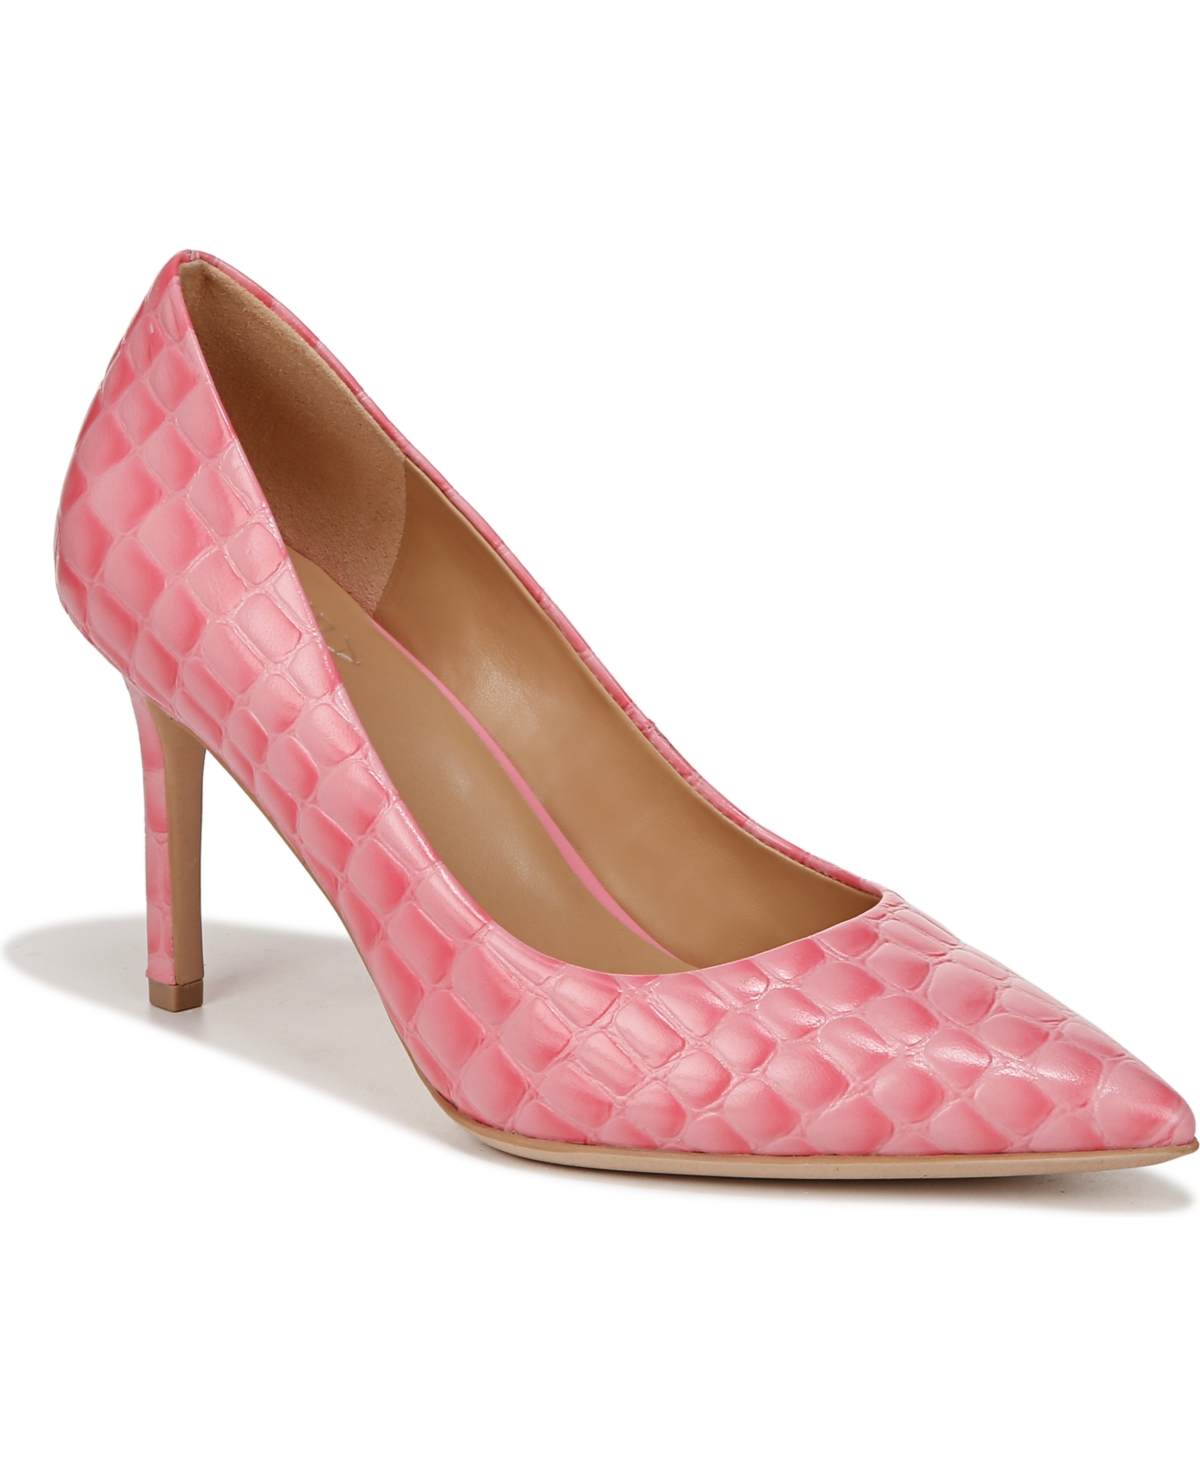 Naturalizer Anna Pumps In Flamingo Flamingo Pink Leather